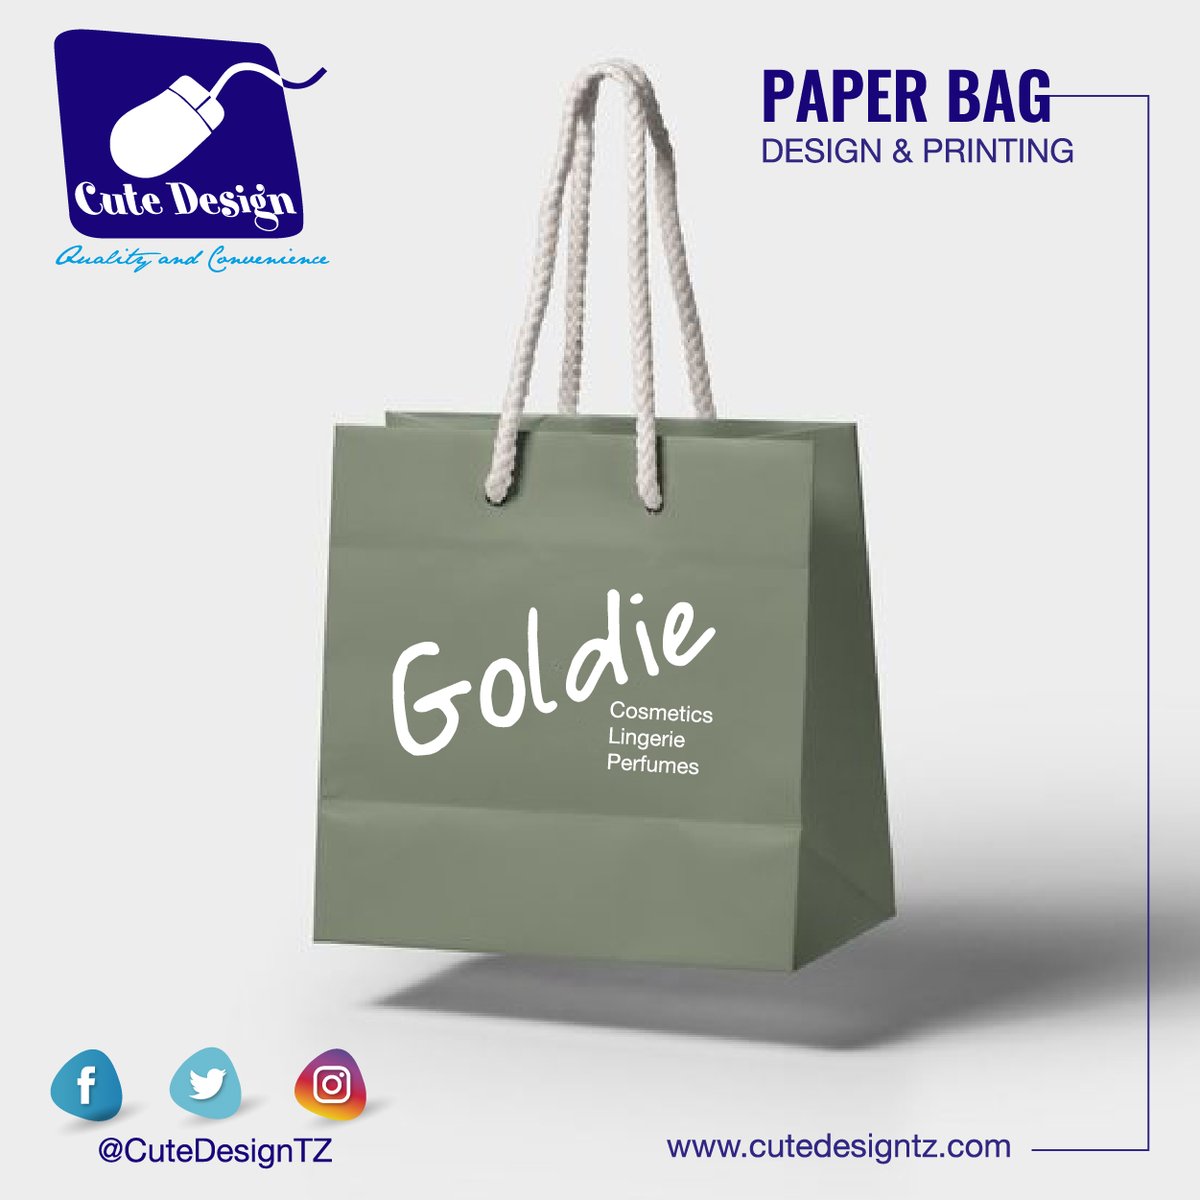 Printed Paper bags carry long-lasting value for your business by strengthening your brand and increasing your customers awareness.

#CuteDesign #CuteDesignTz #QualityAndConvenience #PaperBags #Mifuko #BrandedBags #printing #PromoItems #PrintersInKariakoo #MadeInTanzania